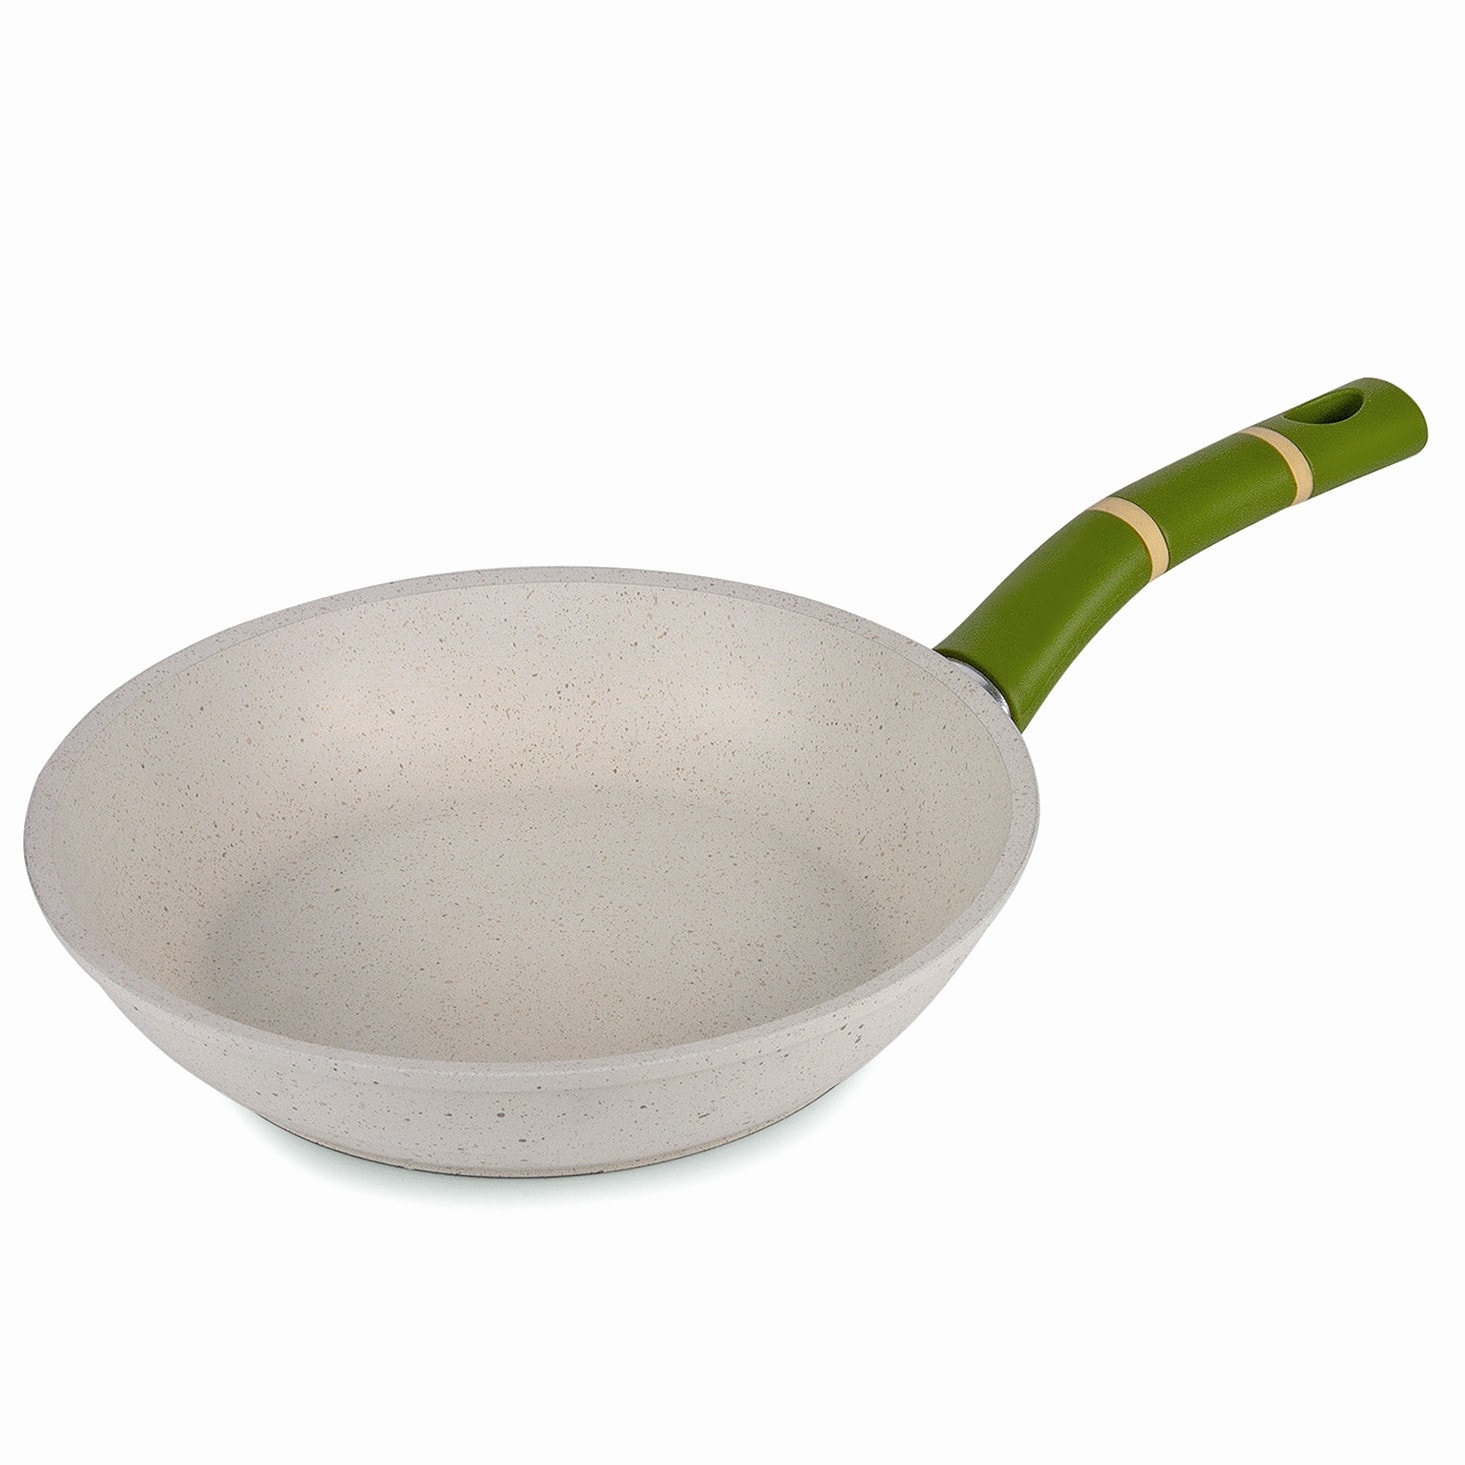 https://ak1.ostkcdn.com/images/products/is/images/direct/d775a118cd9dc290f4db89c2b4a611dd5c0f514c/Bamboo-Stone-Beige-Non-Stick-Frying-Pan.jpg